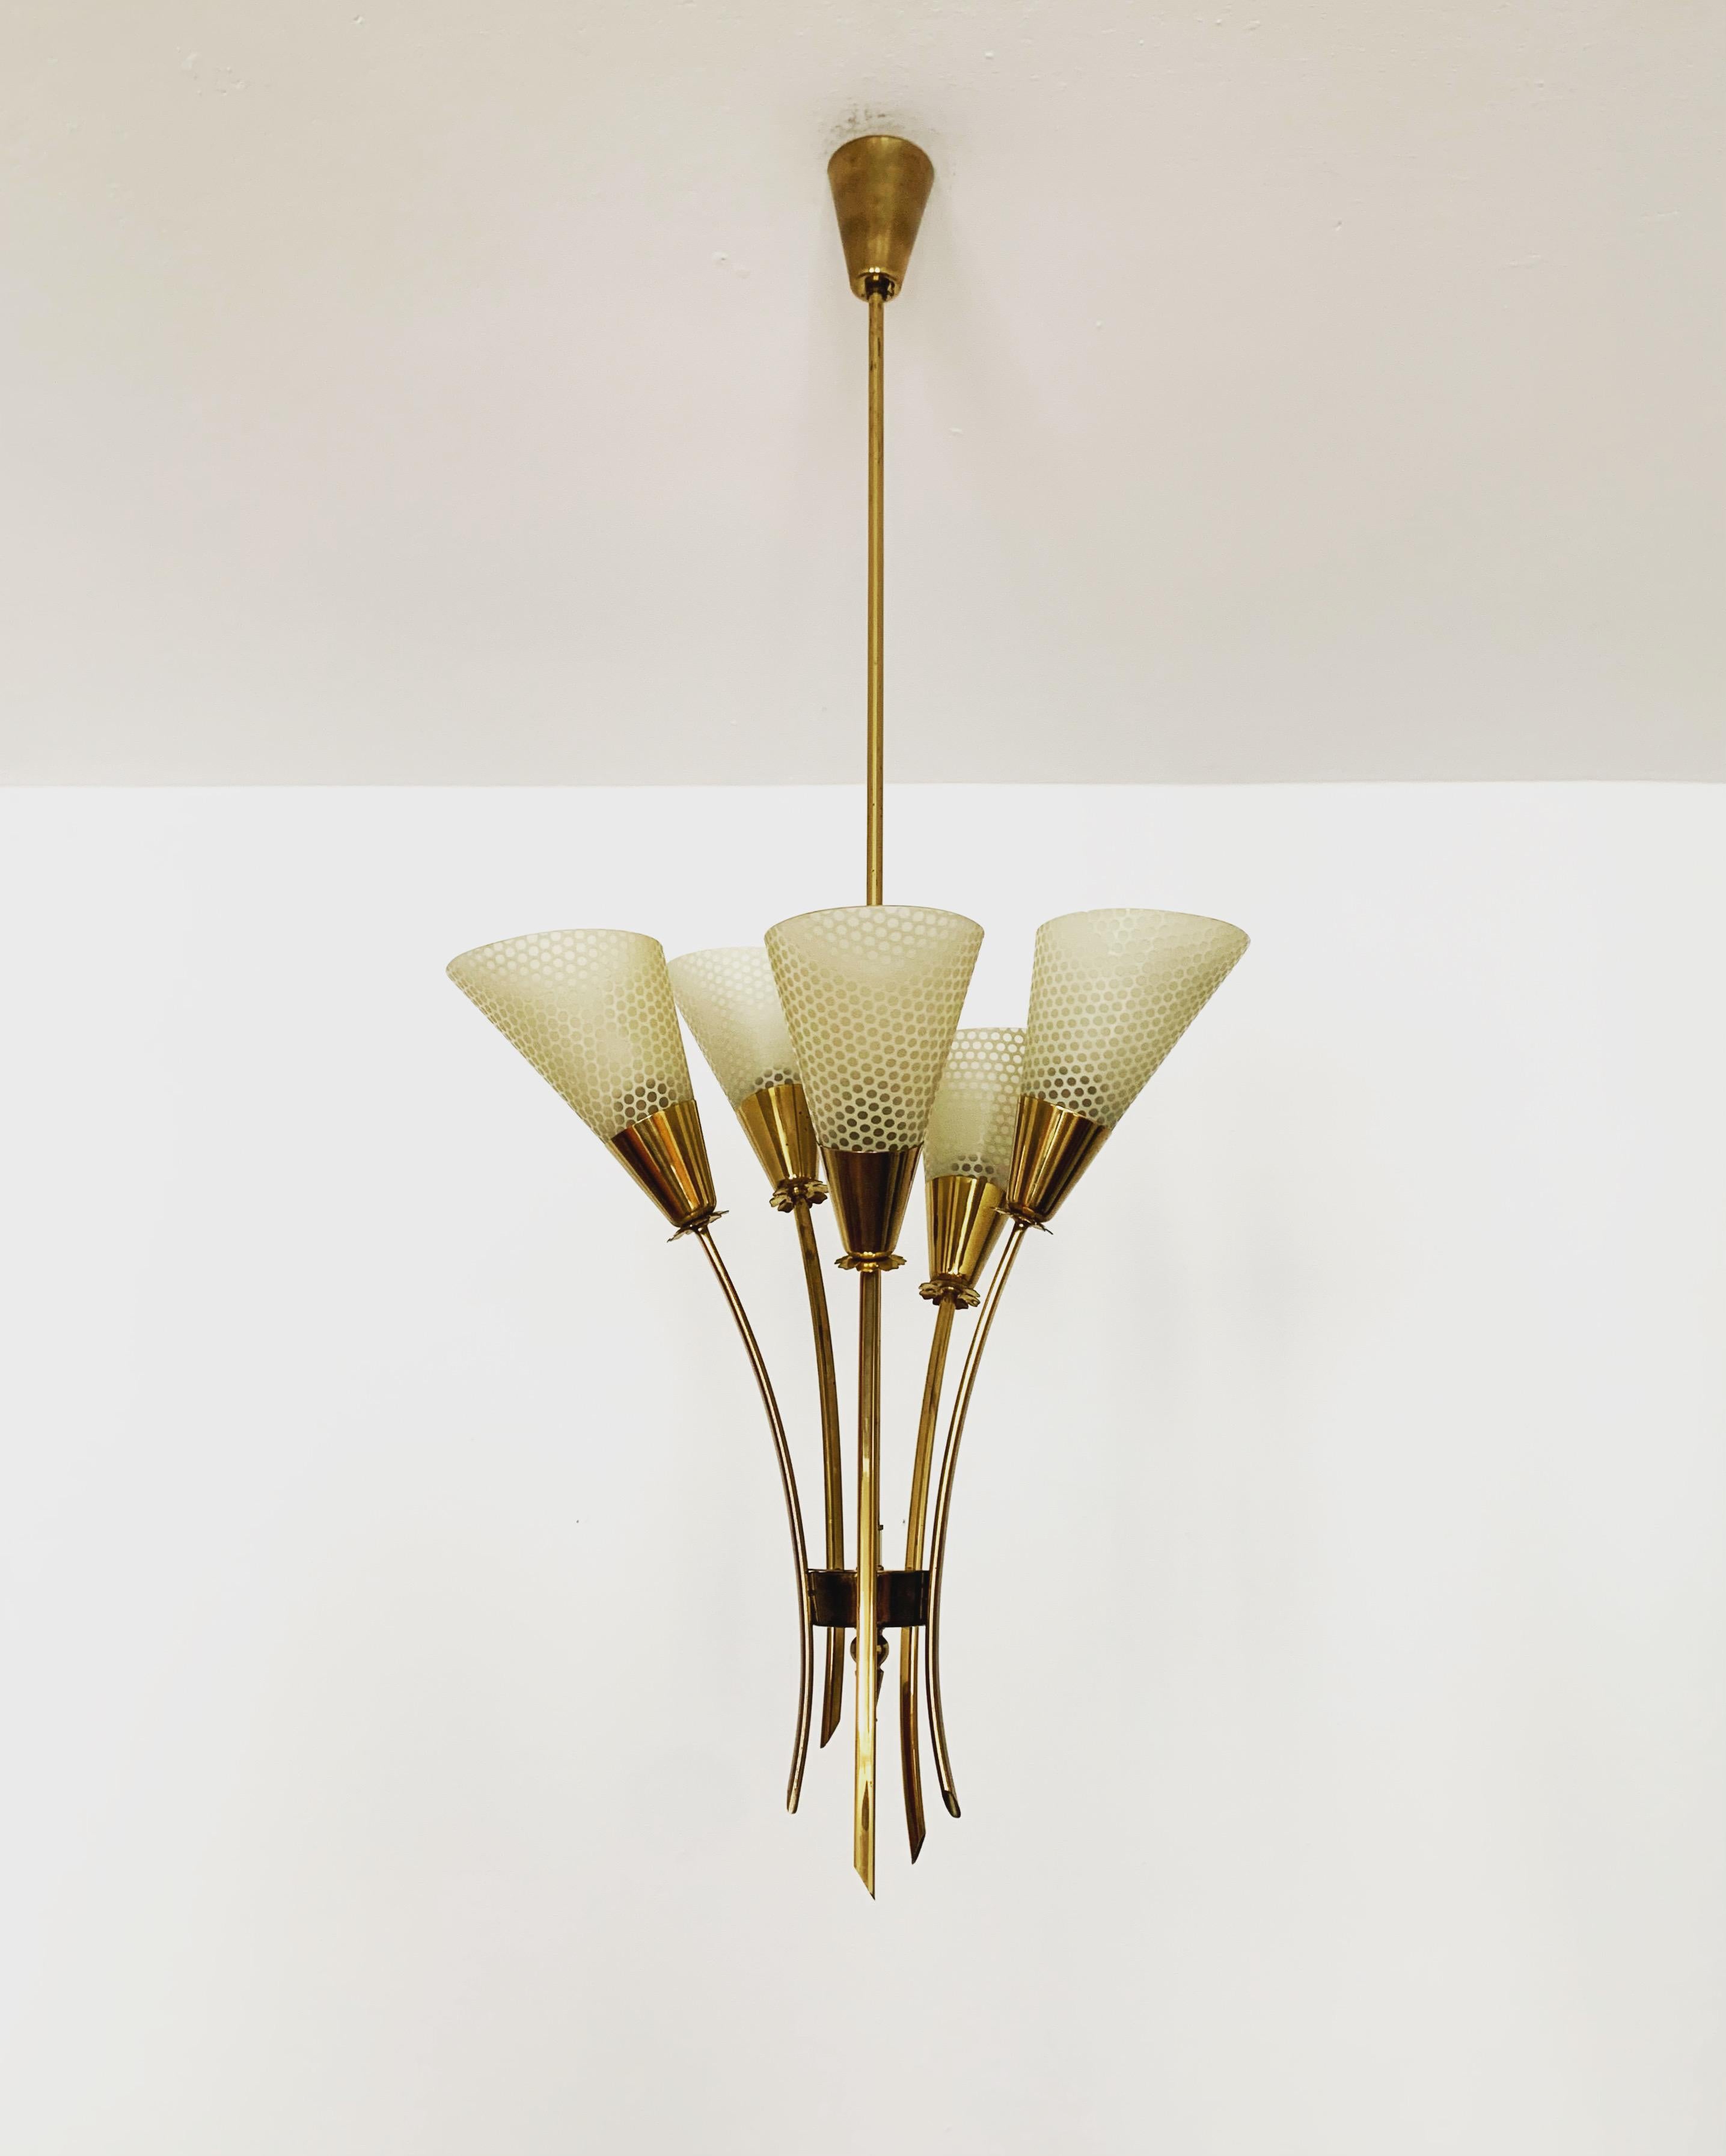 Exceptionally beautiful and stylish Italian chandelier from the 1950s.
Wonderful design and an asset to any home.
Very nice glass lampshades with a great pattern.

Condition:

Very good vintage condition with slight signs of wear consistent with